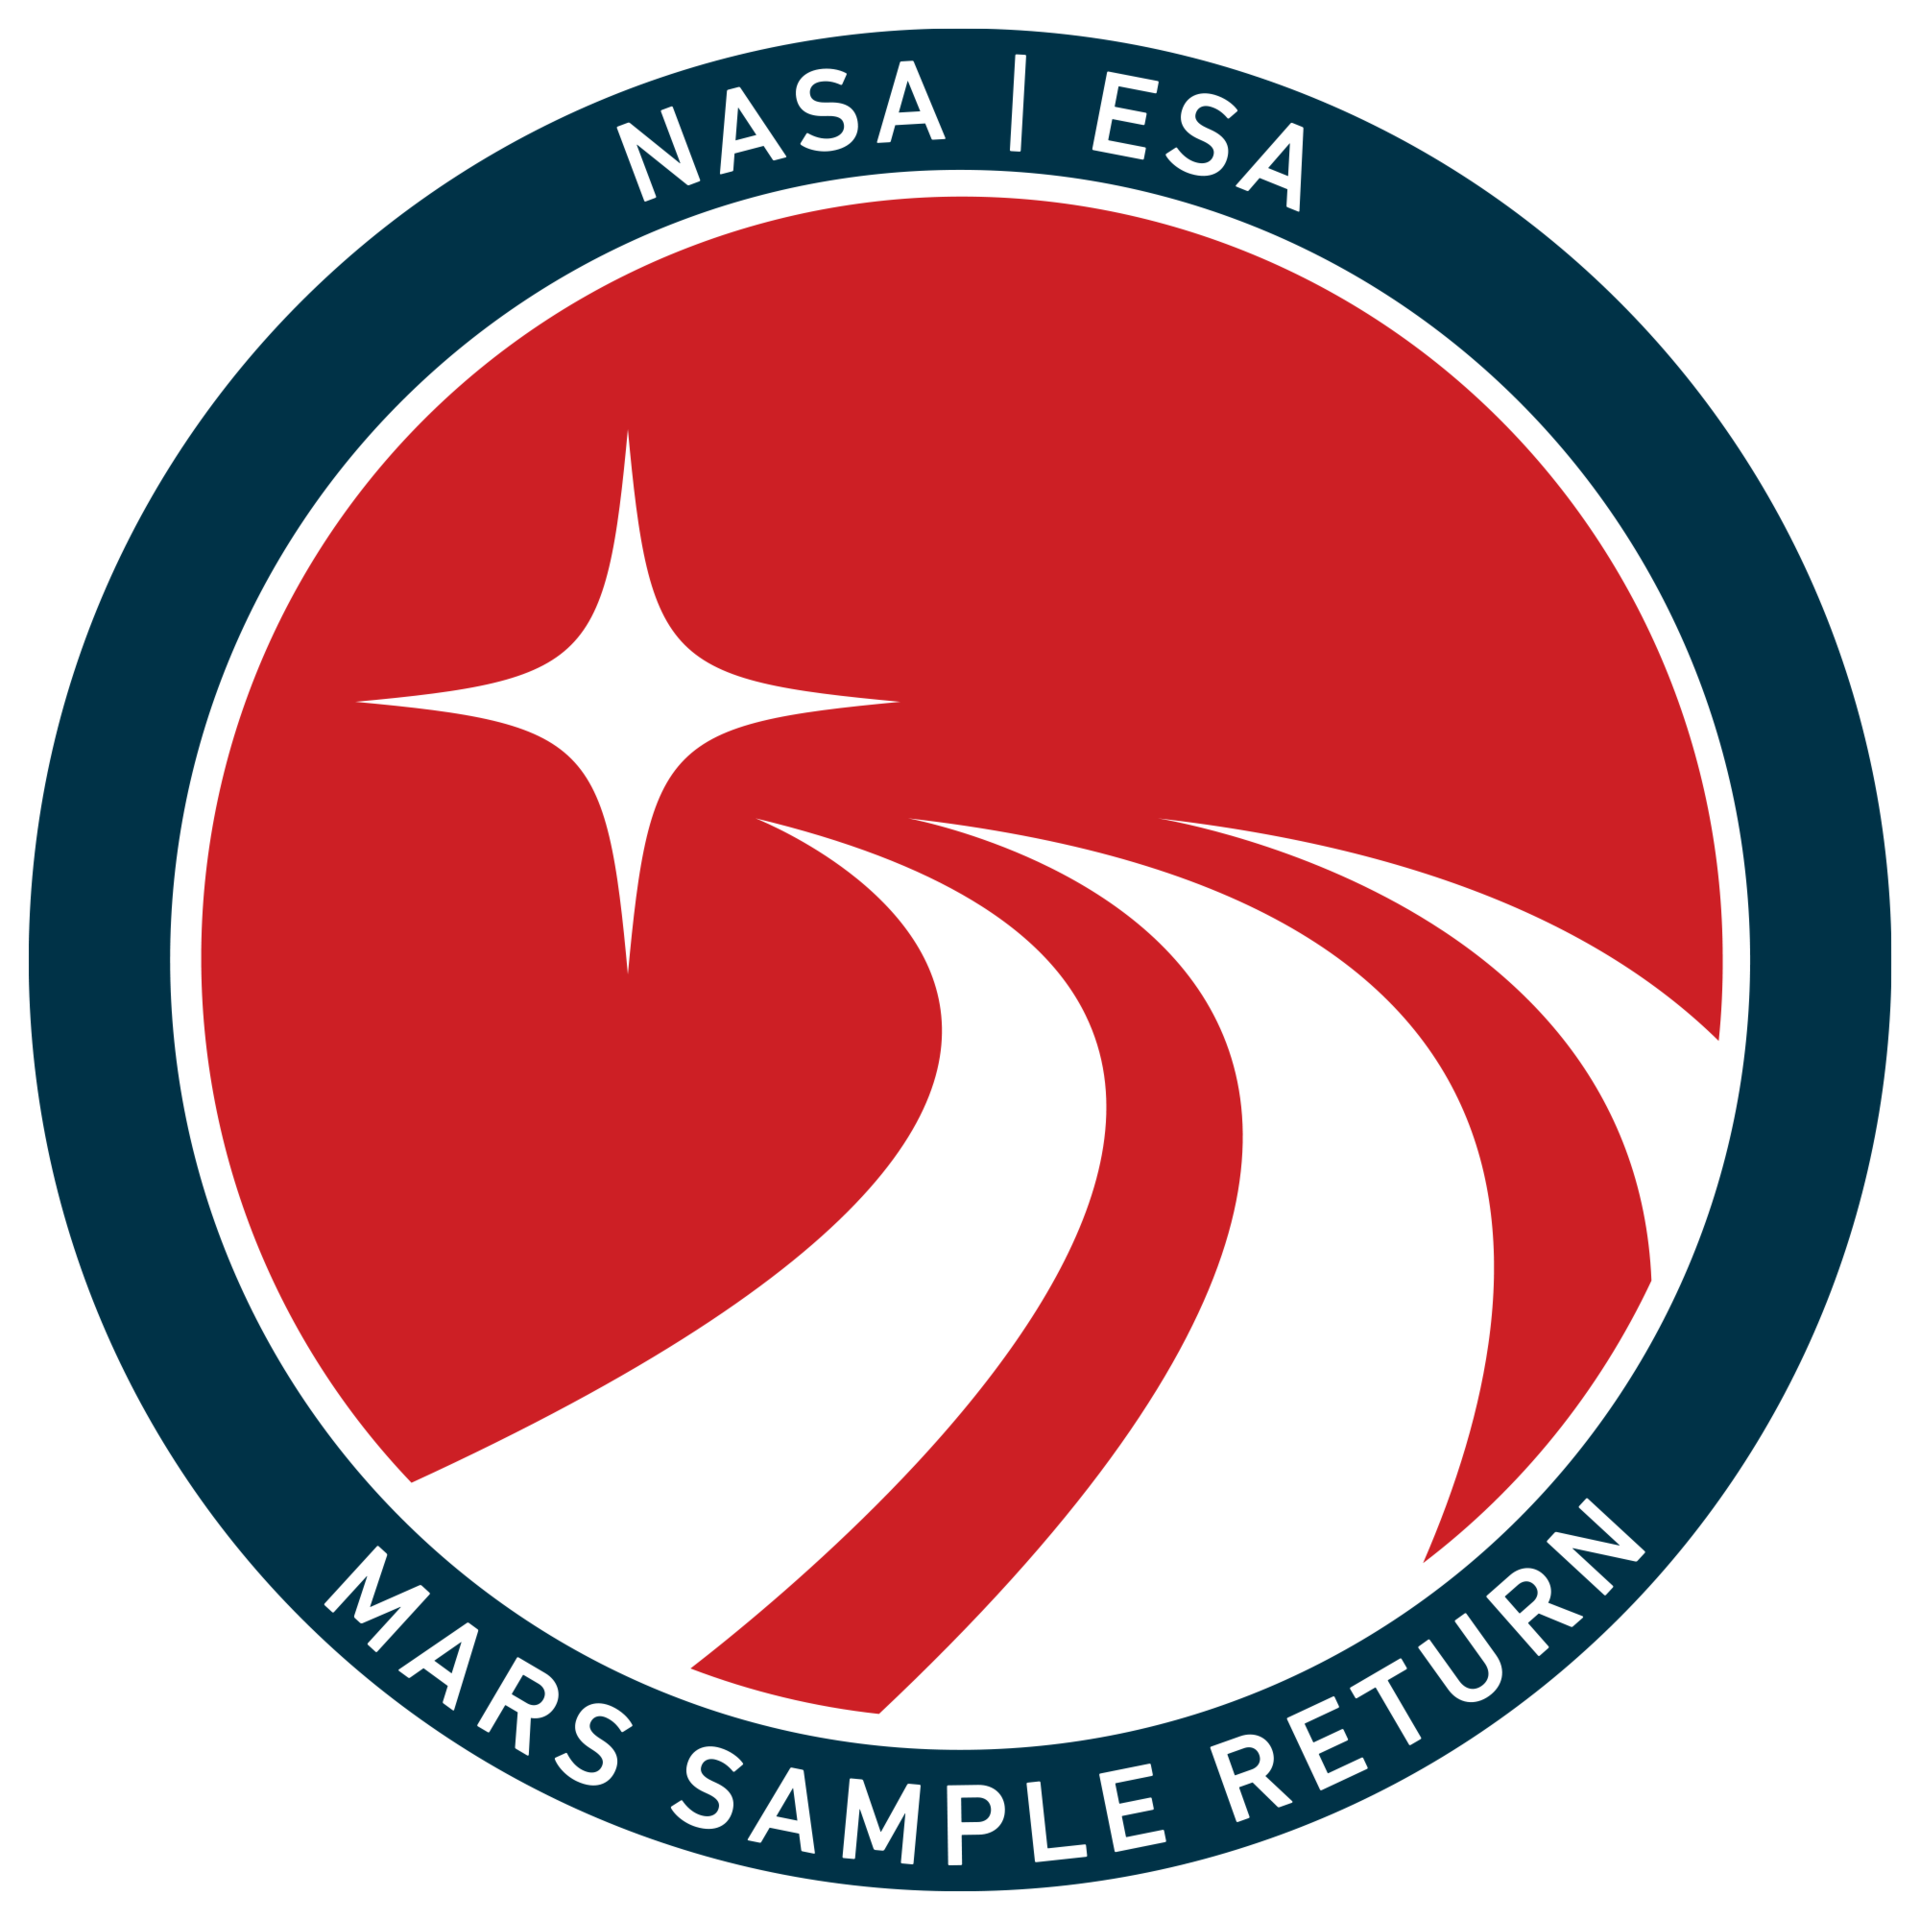 Mars Sample Return logo; Red circle with a white diamond shaped star and tire tracks leading away from it.